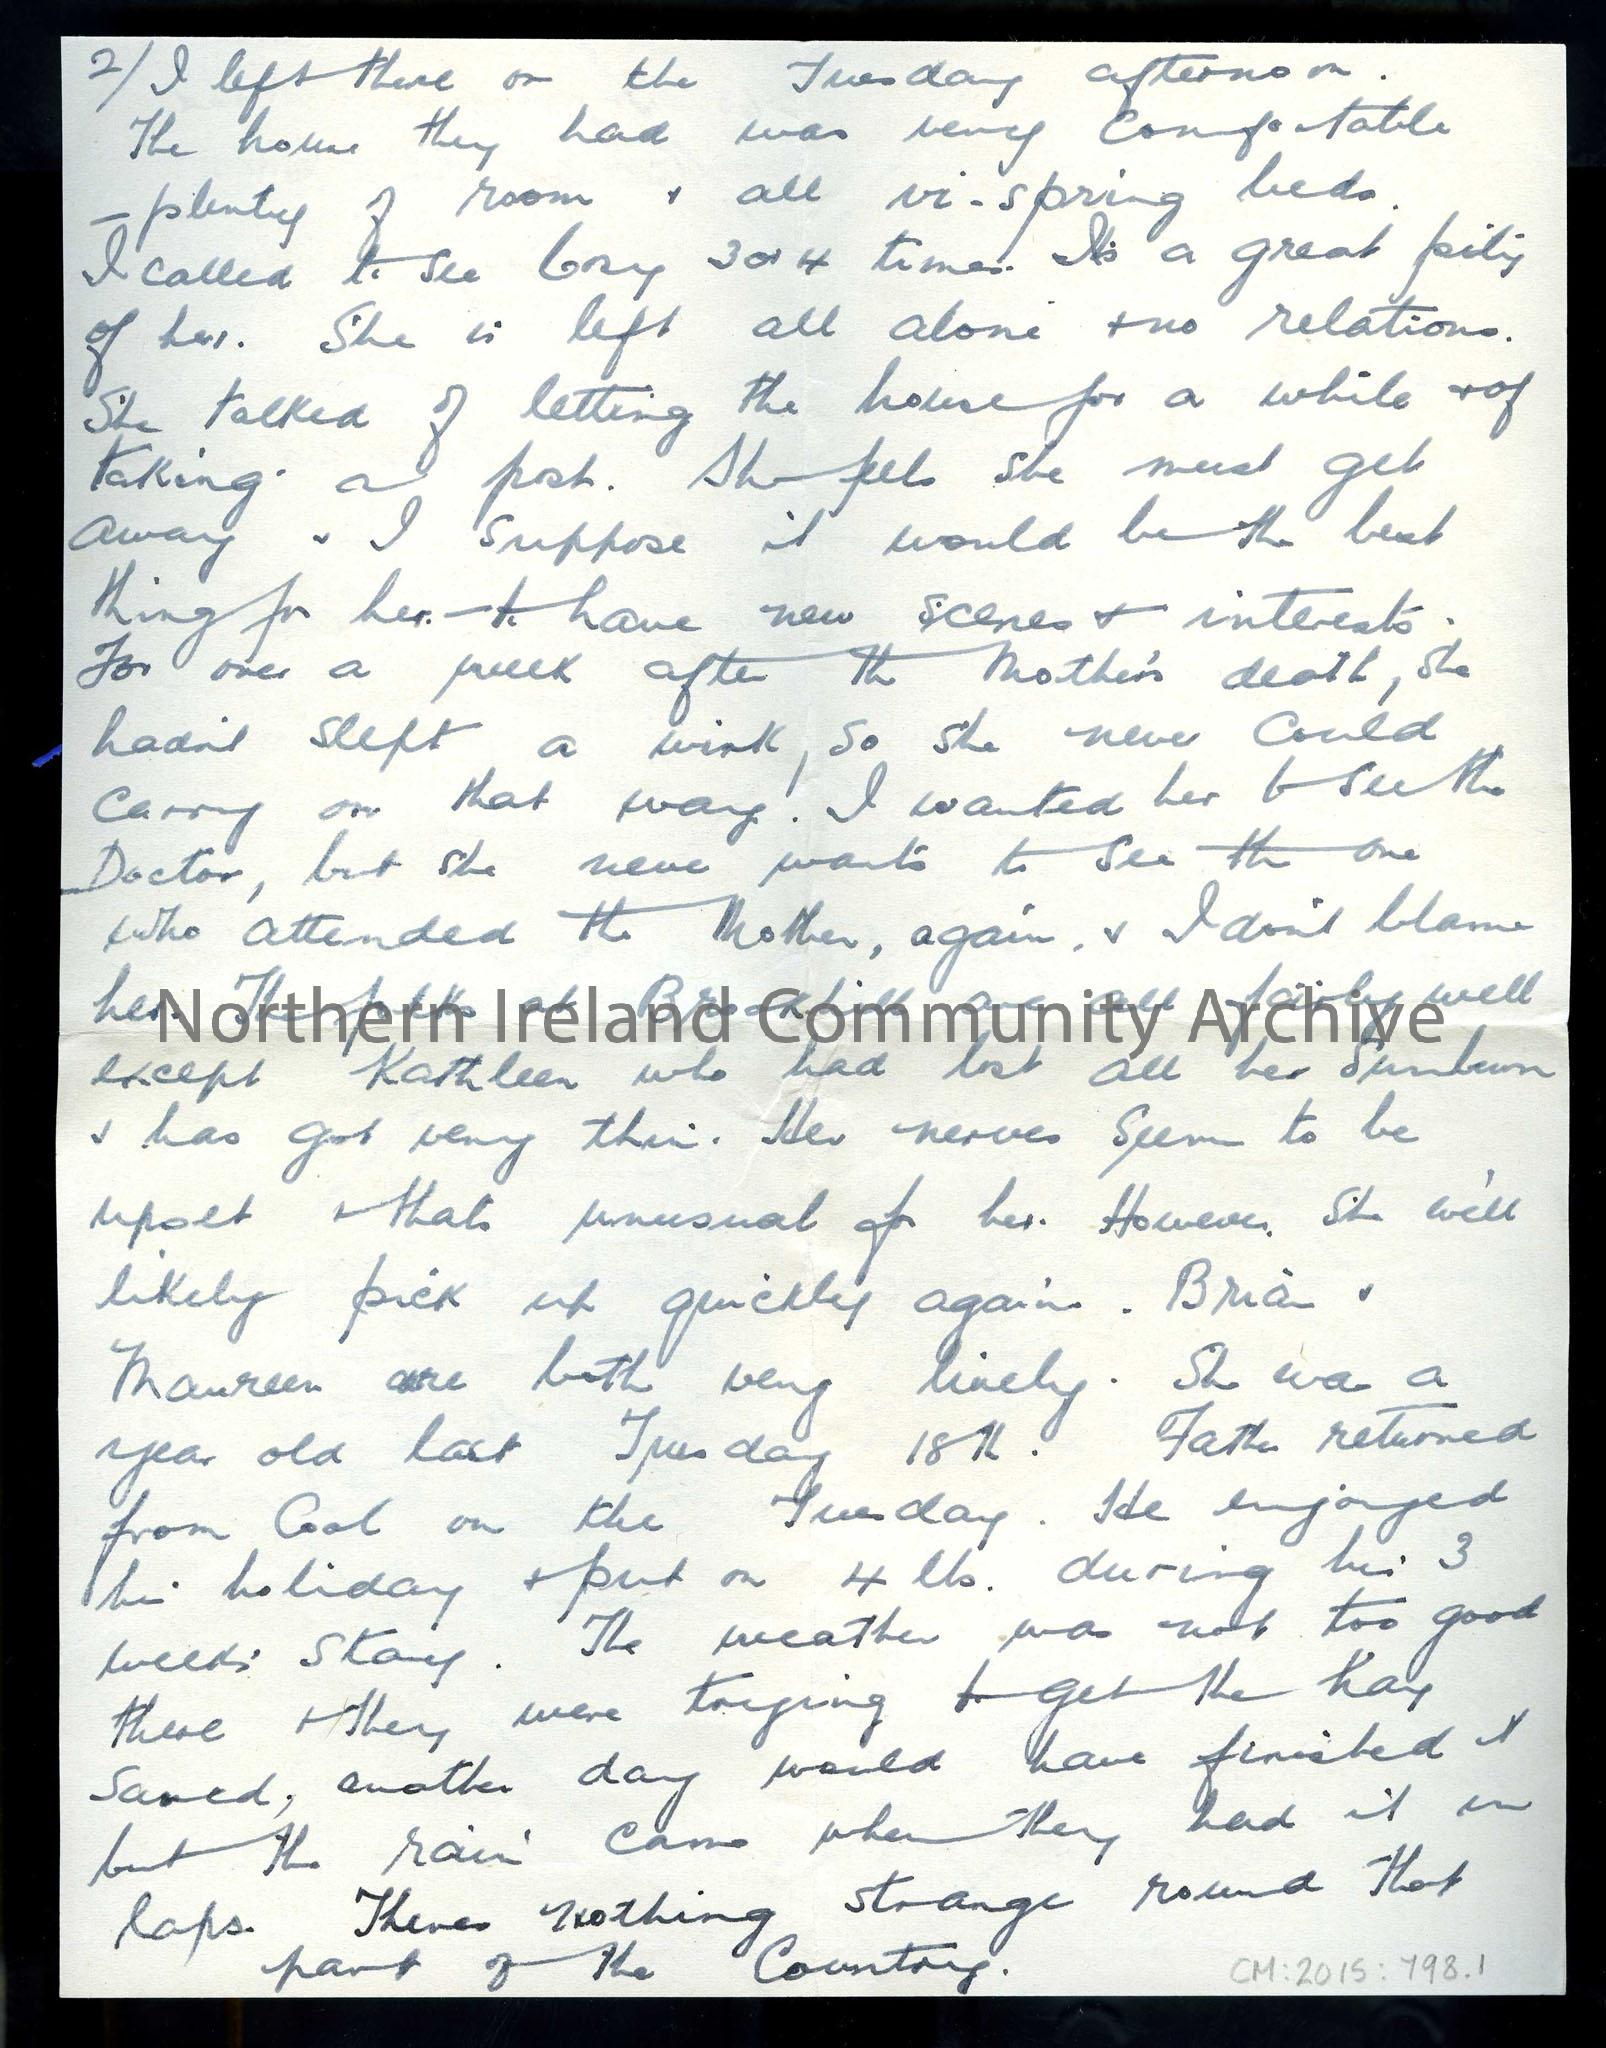 Page one of two – Addressed to Bill (William) from Tillie and father. Sent from Bangor and dated 21.8.1942. Writes about her holiday to Portrush, abou…